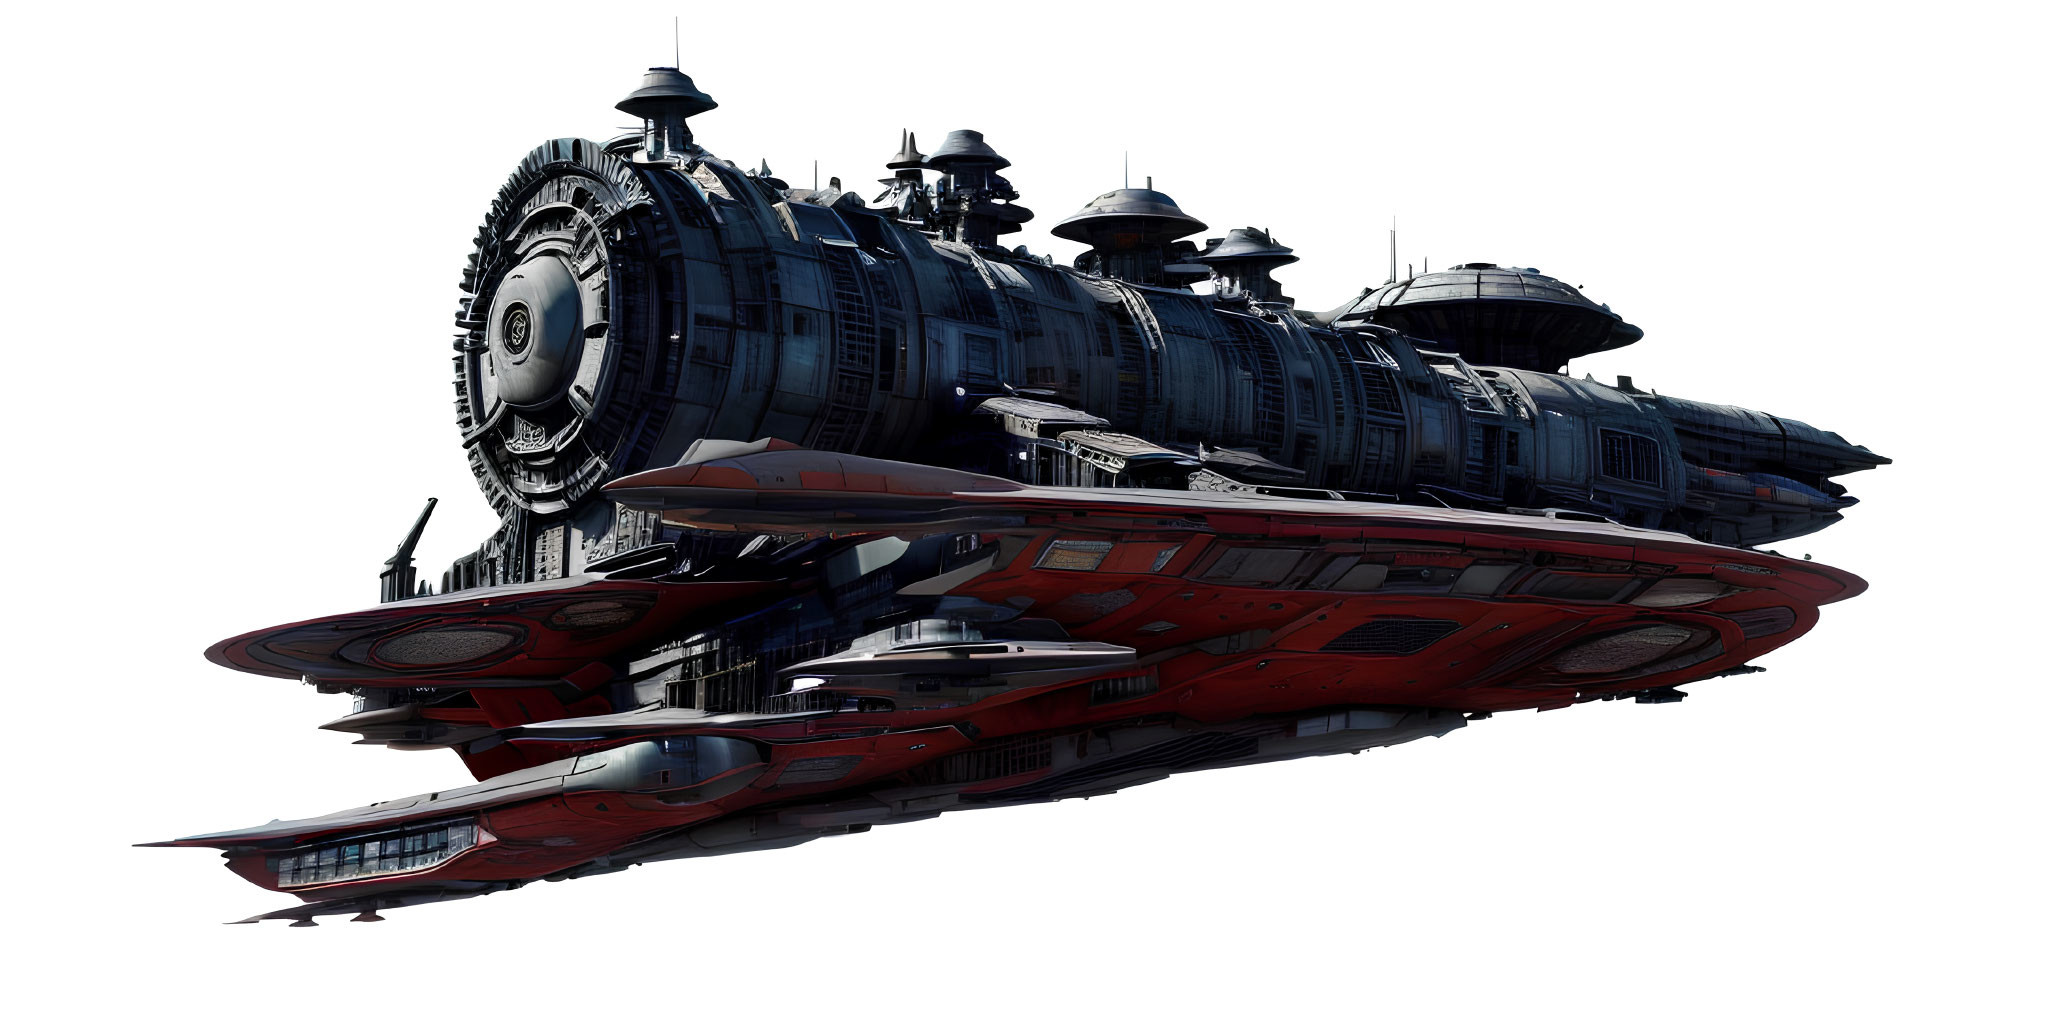 Detailed Sci-Fi Spaceship with Metallic Textures and Red Accents